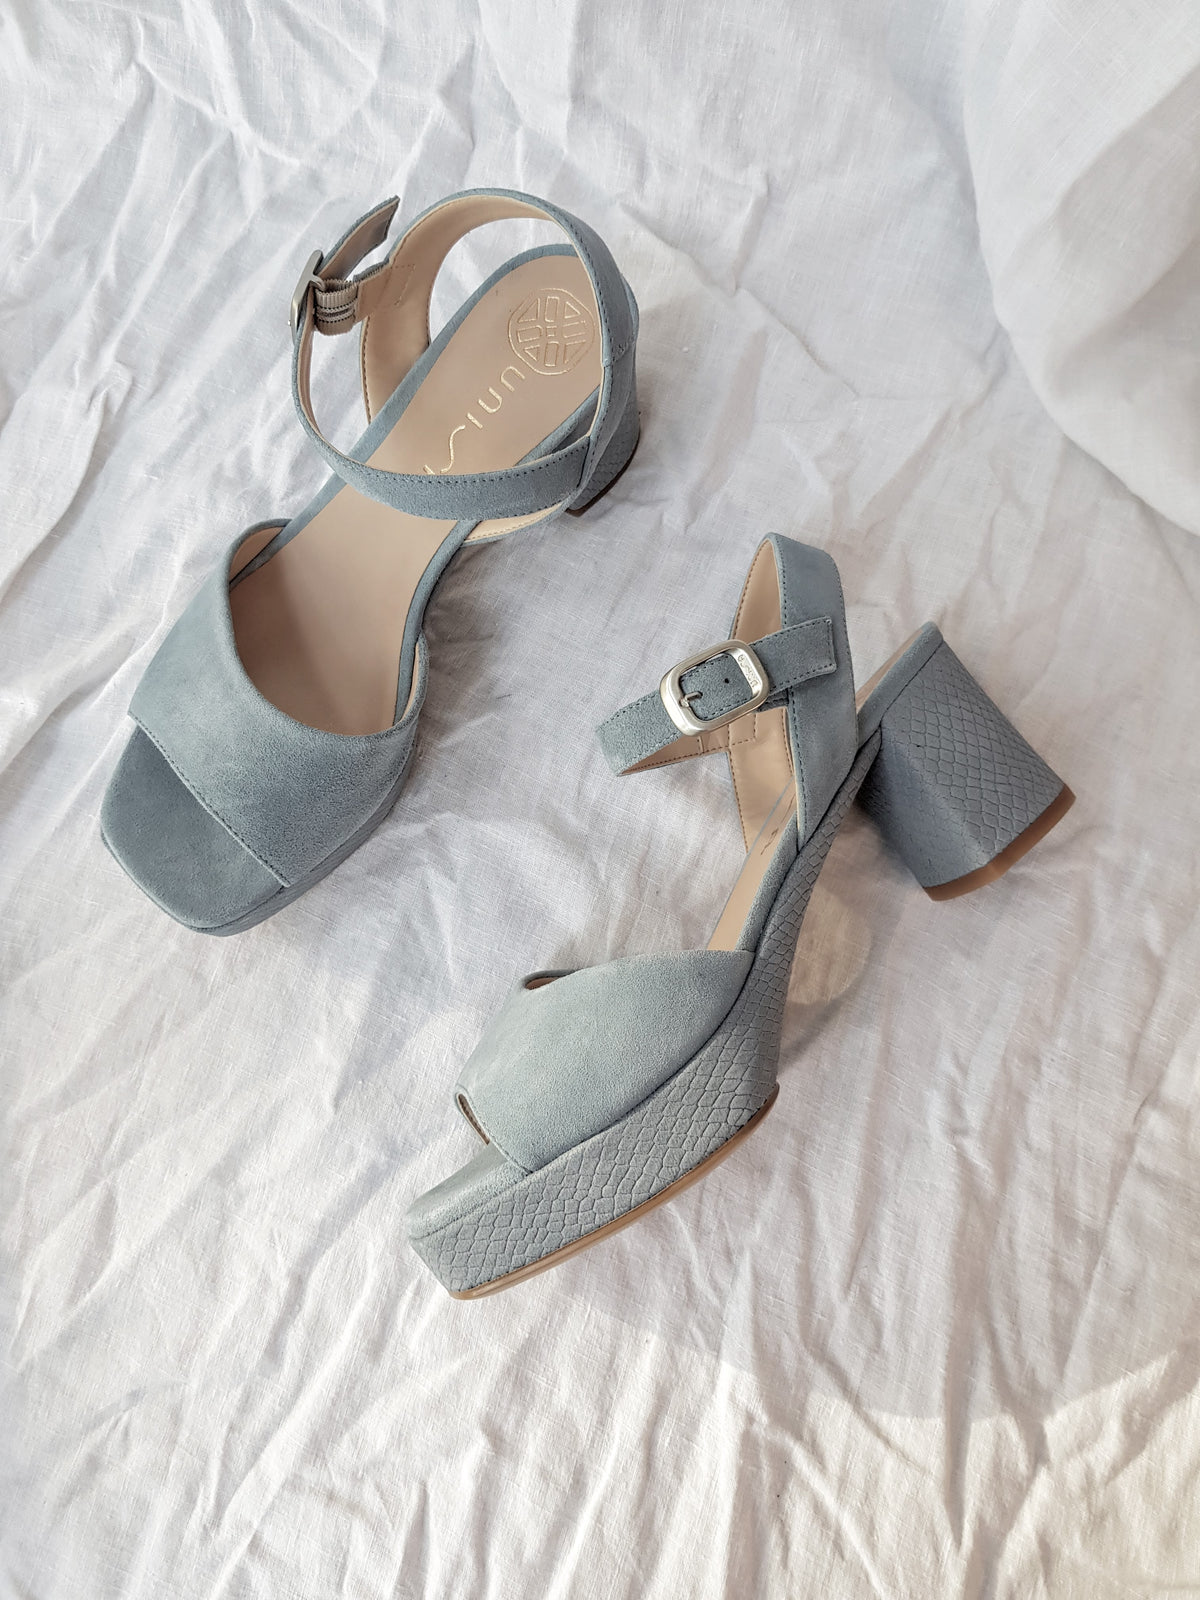 blue suede platform heels with ankle strap and silver buckle